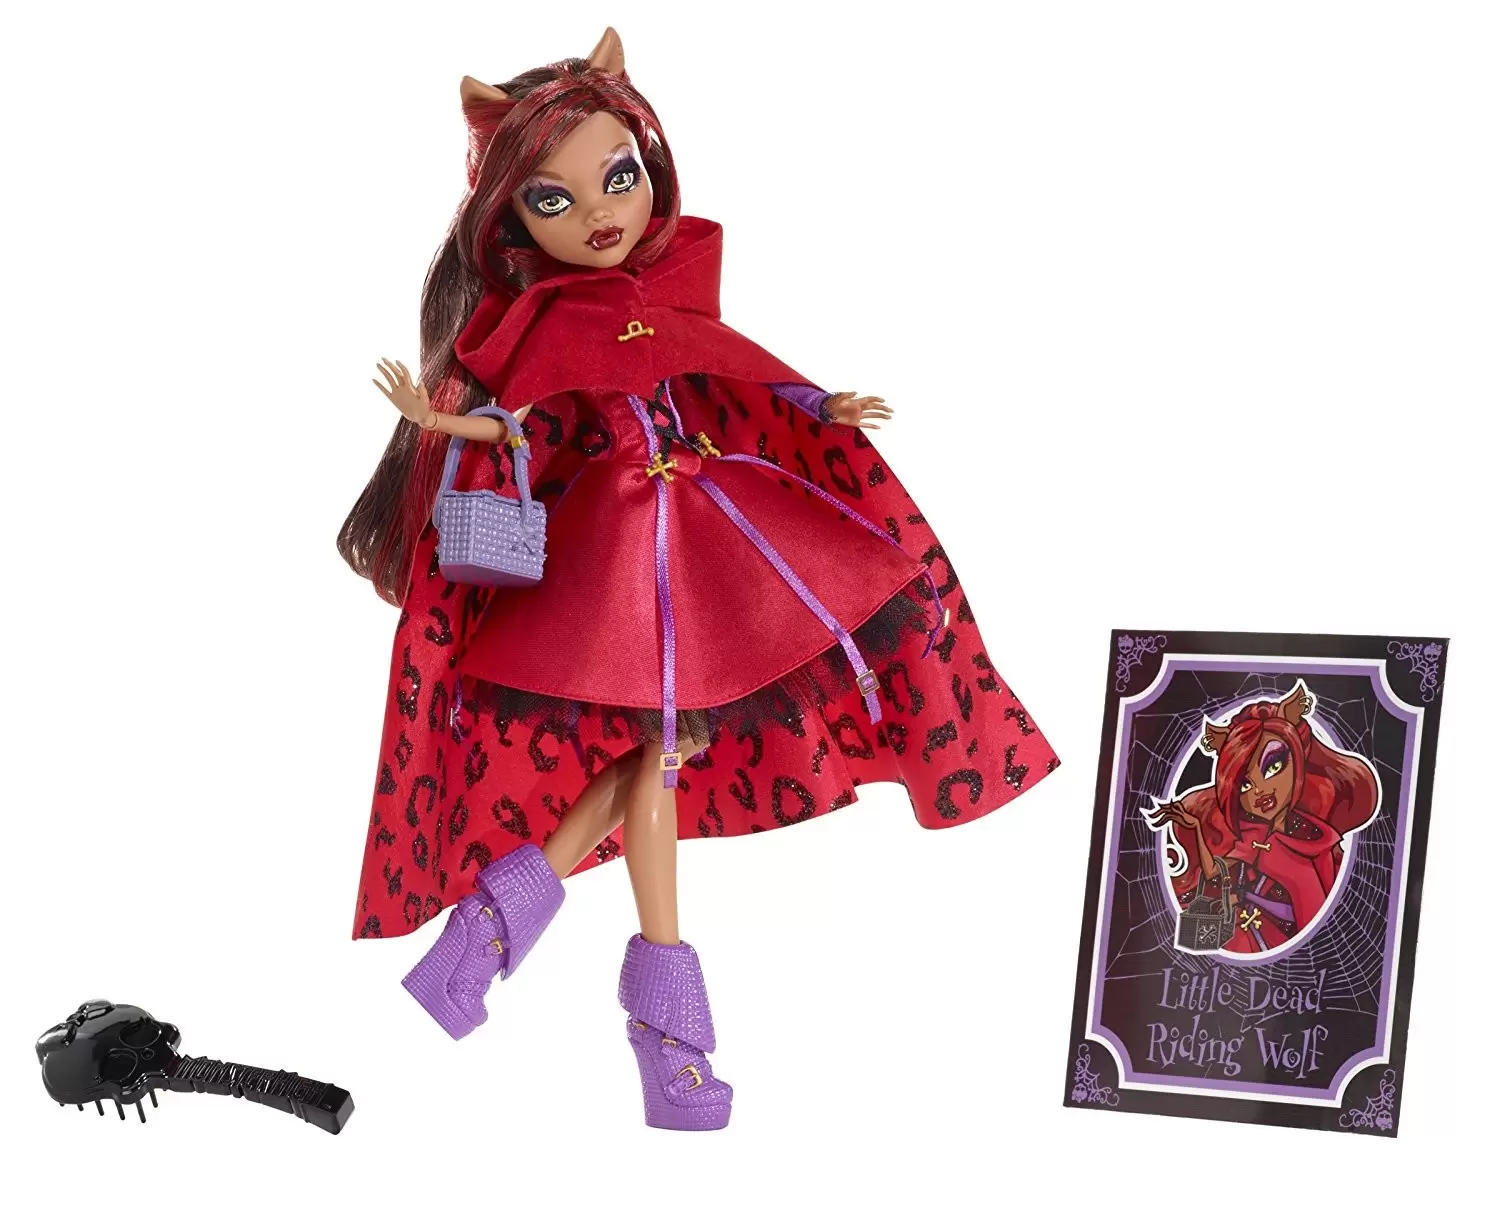 Monster High Dolls - Clawdeen Wolf (Little Dead Riding Wolf) - Scary Tales